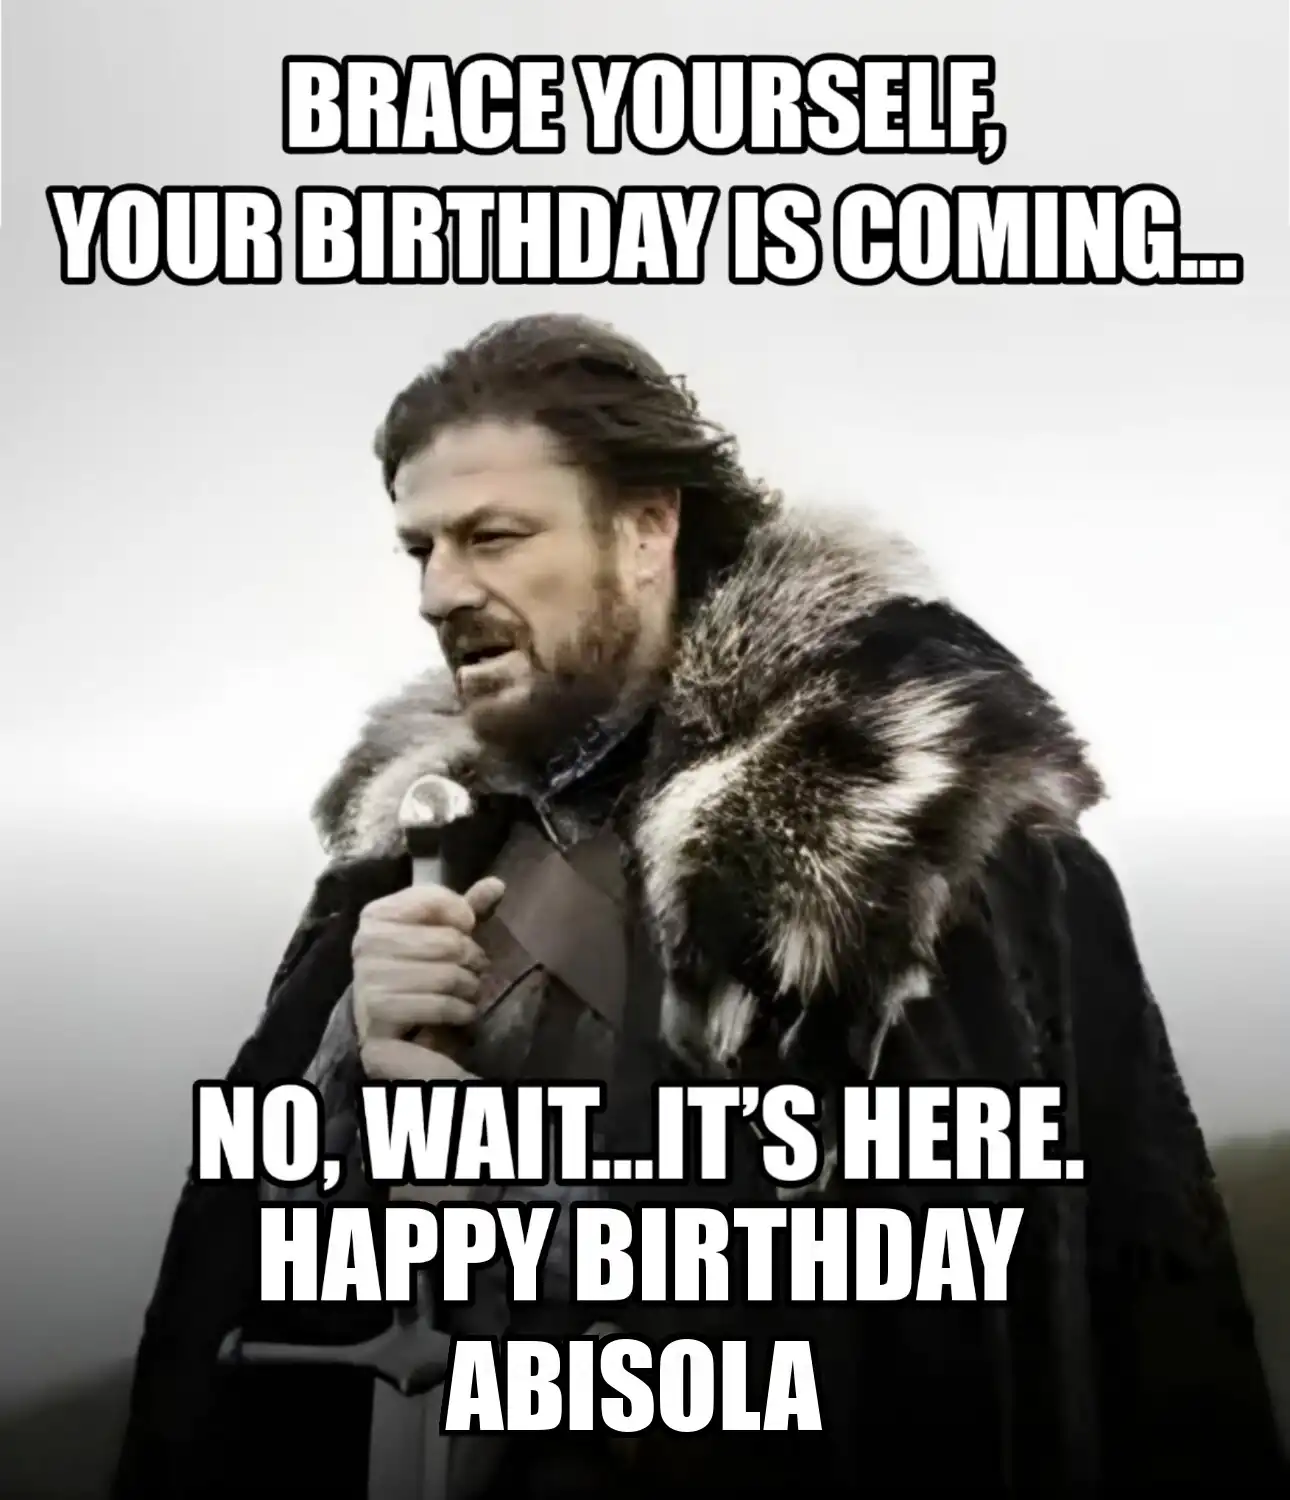 Happy Birthday Abisola Brace Yourself Your Birthday Is Coming Meme